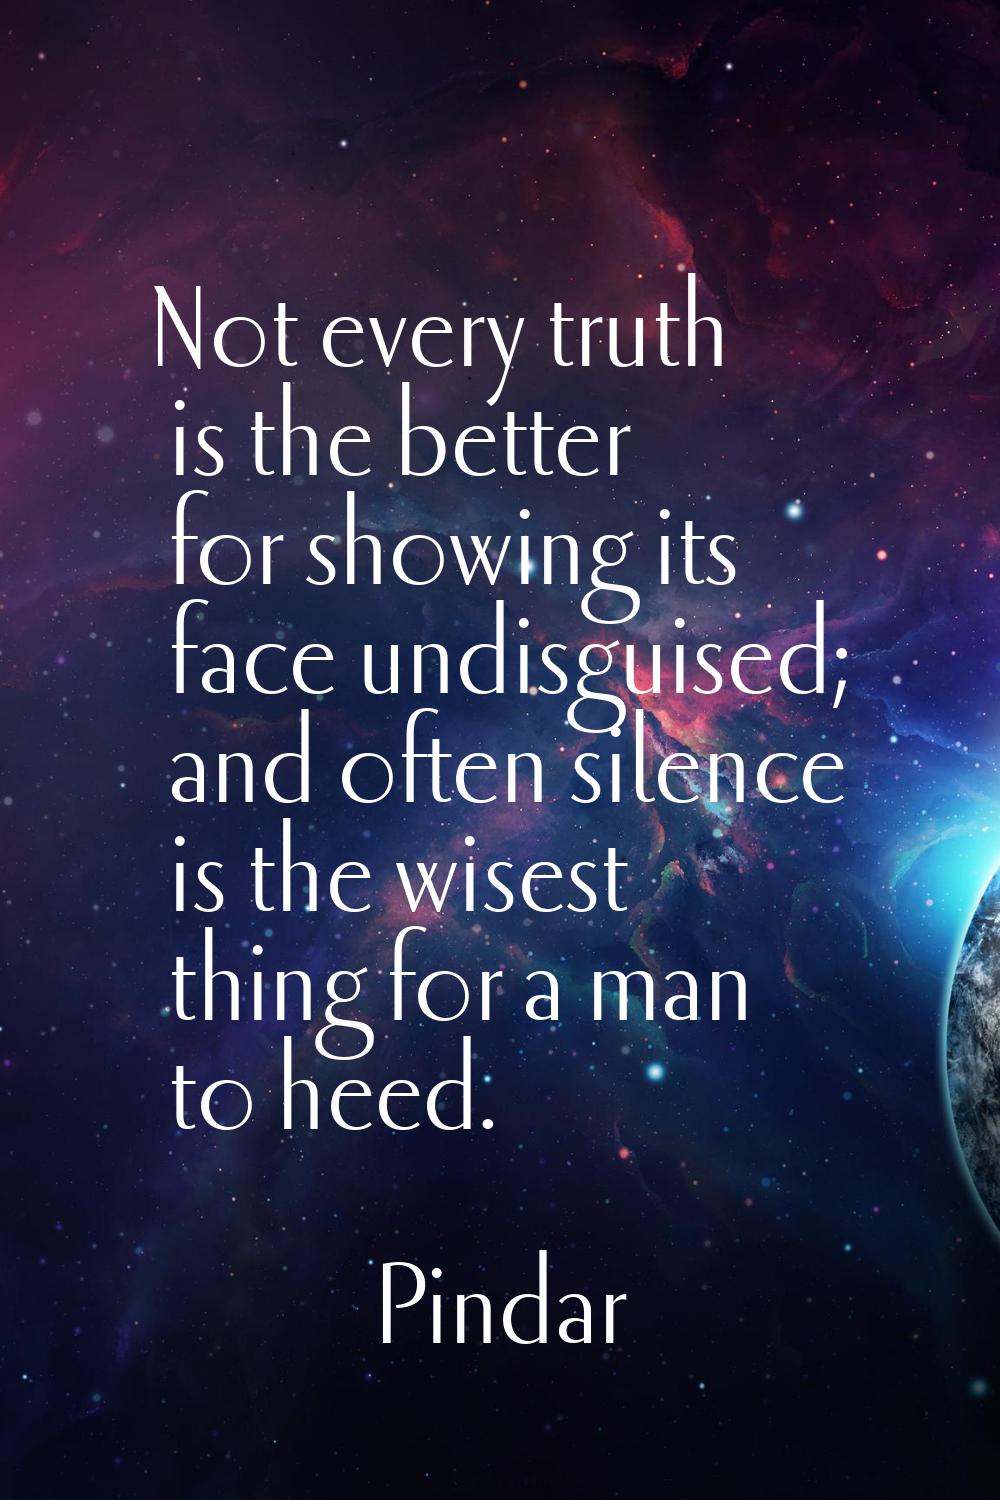 Not every truth is the better for showing its face undisguised; and often silence is the wisest thi